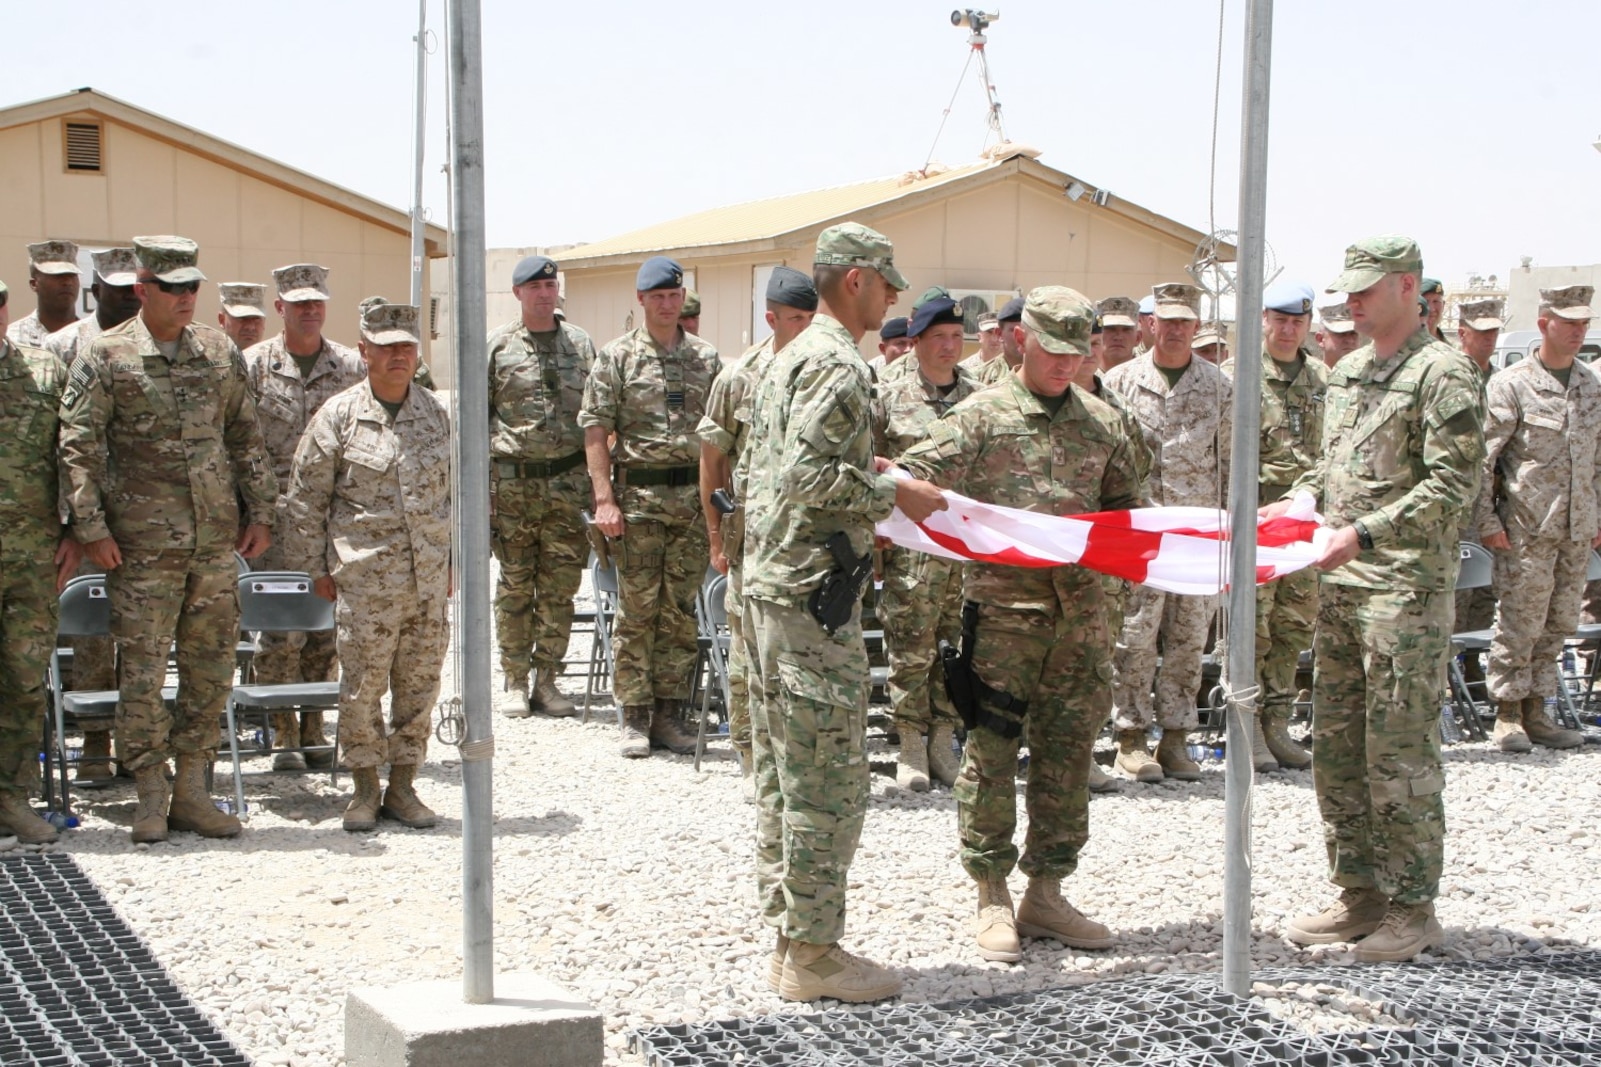 Soldiers with the Republic of Georgia fold their flag during a ceremony aboard Camp Leatherneck, Helmand province, Afghanistan, July 15, 2014. The ceremony marked the end of mission for the Georgian army serving with Regional Command (Southwest).